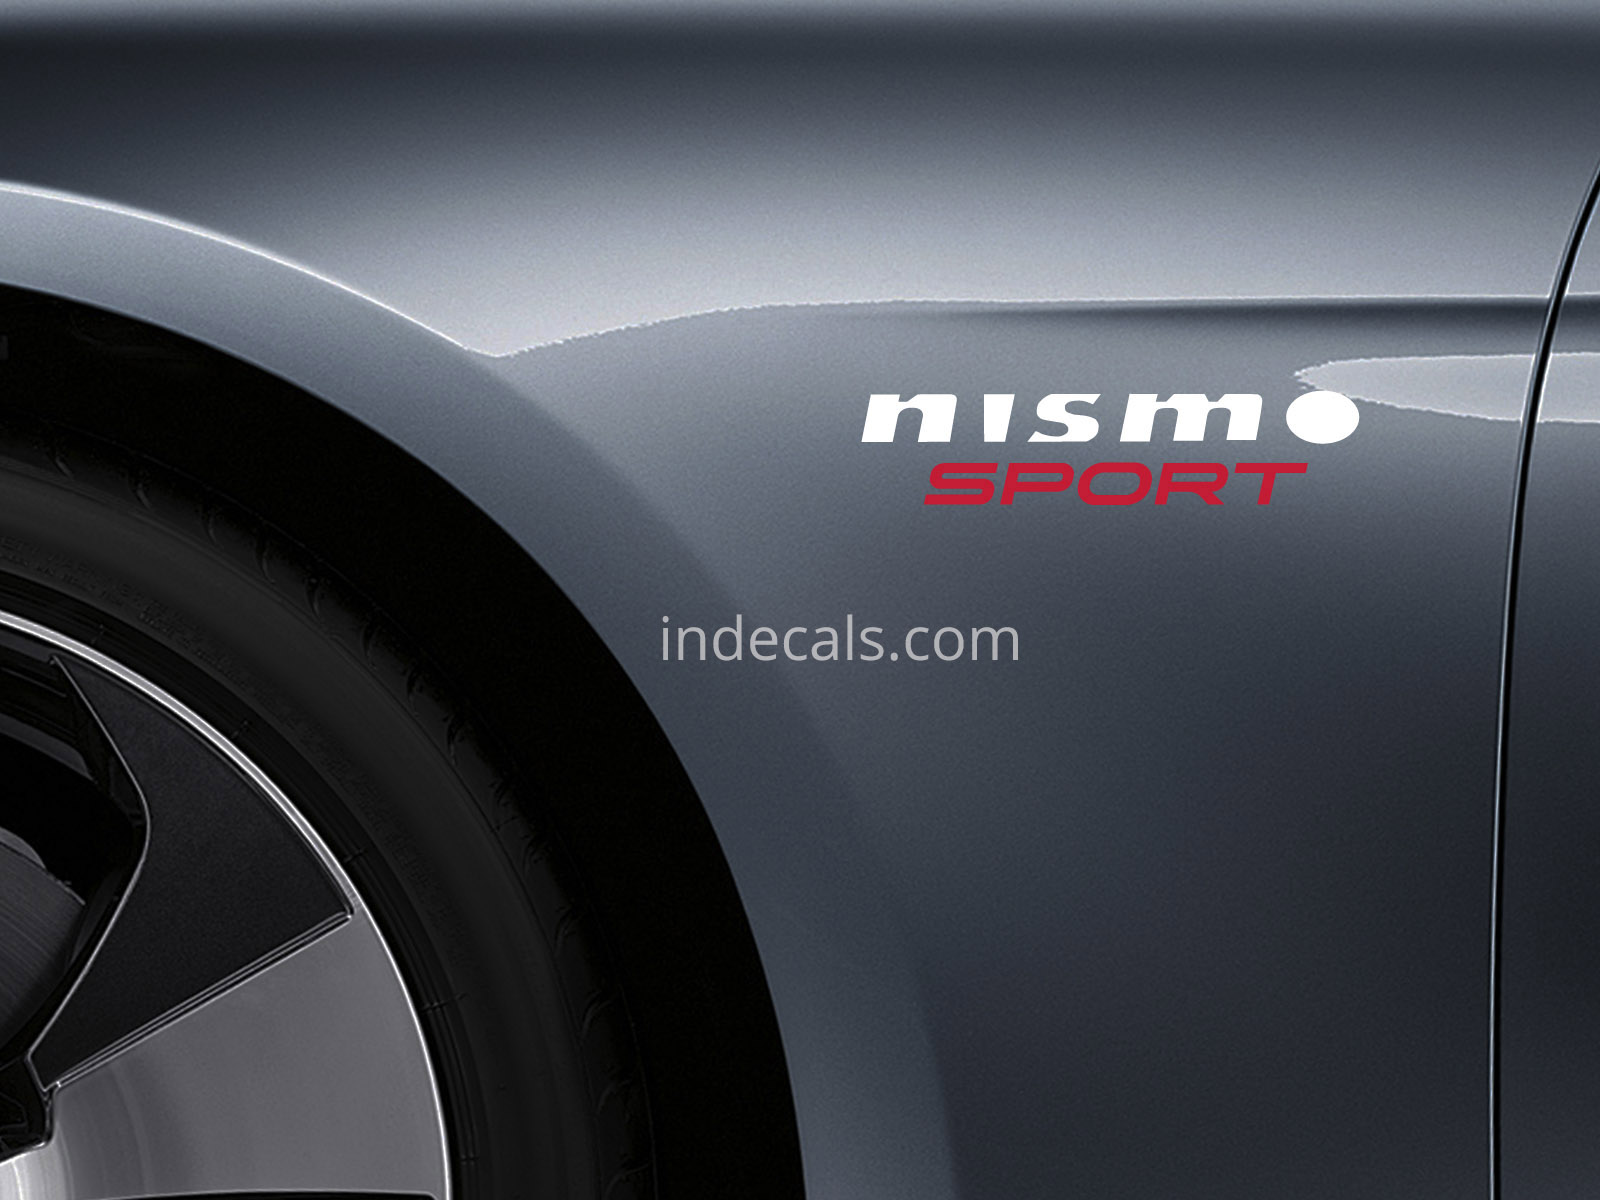 2 x Nismo Sports Stickers for Wings - White & Red